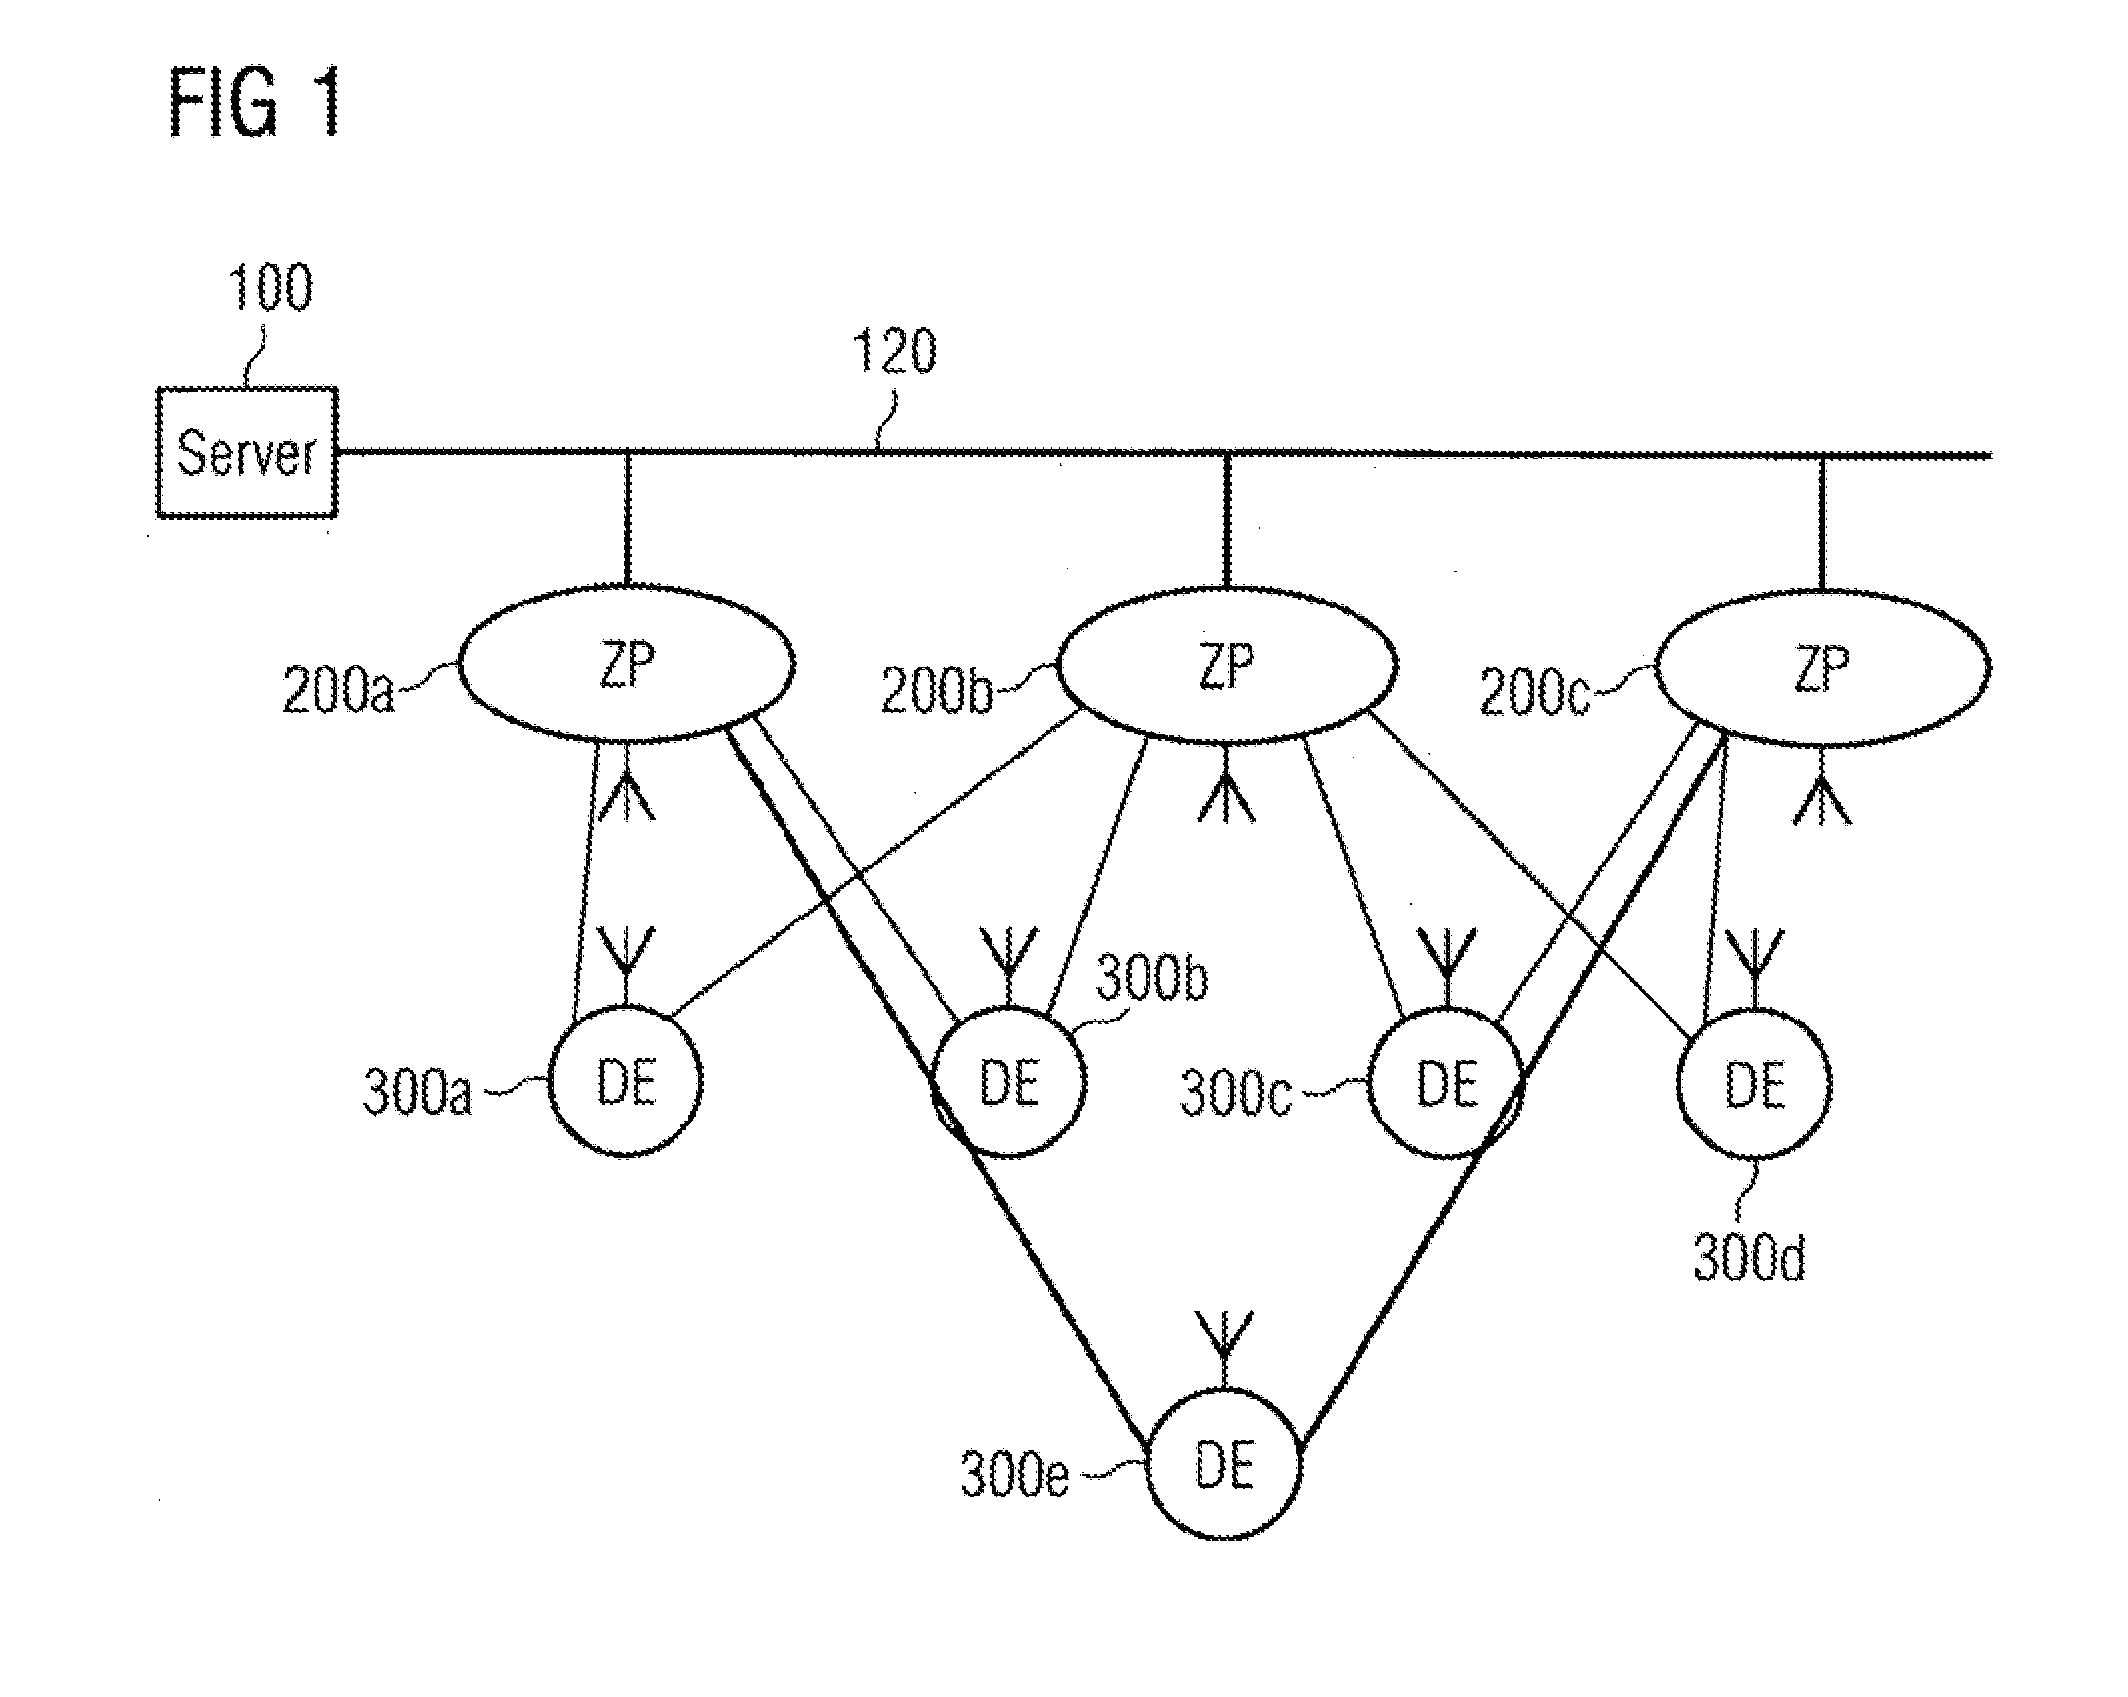 Method for considerably enhancing the availability of wireless connections